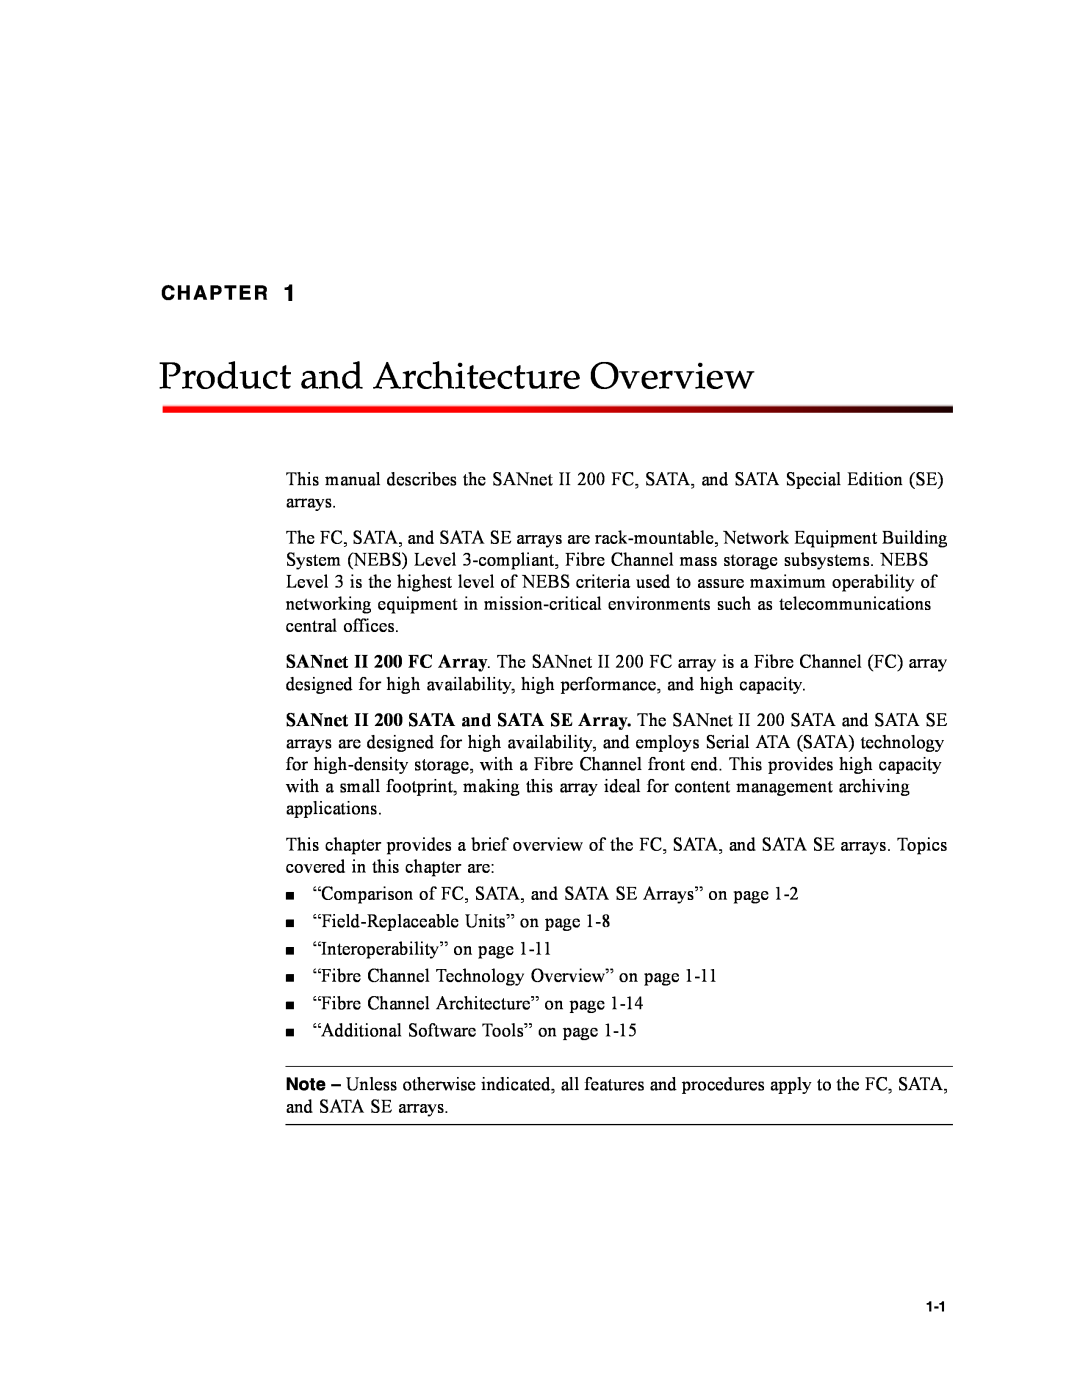 Dot Hill Systems II 200 FC service manual Product and Architecture Overview, Chapter 